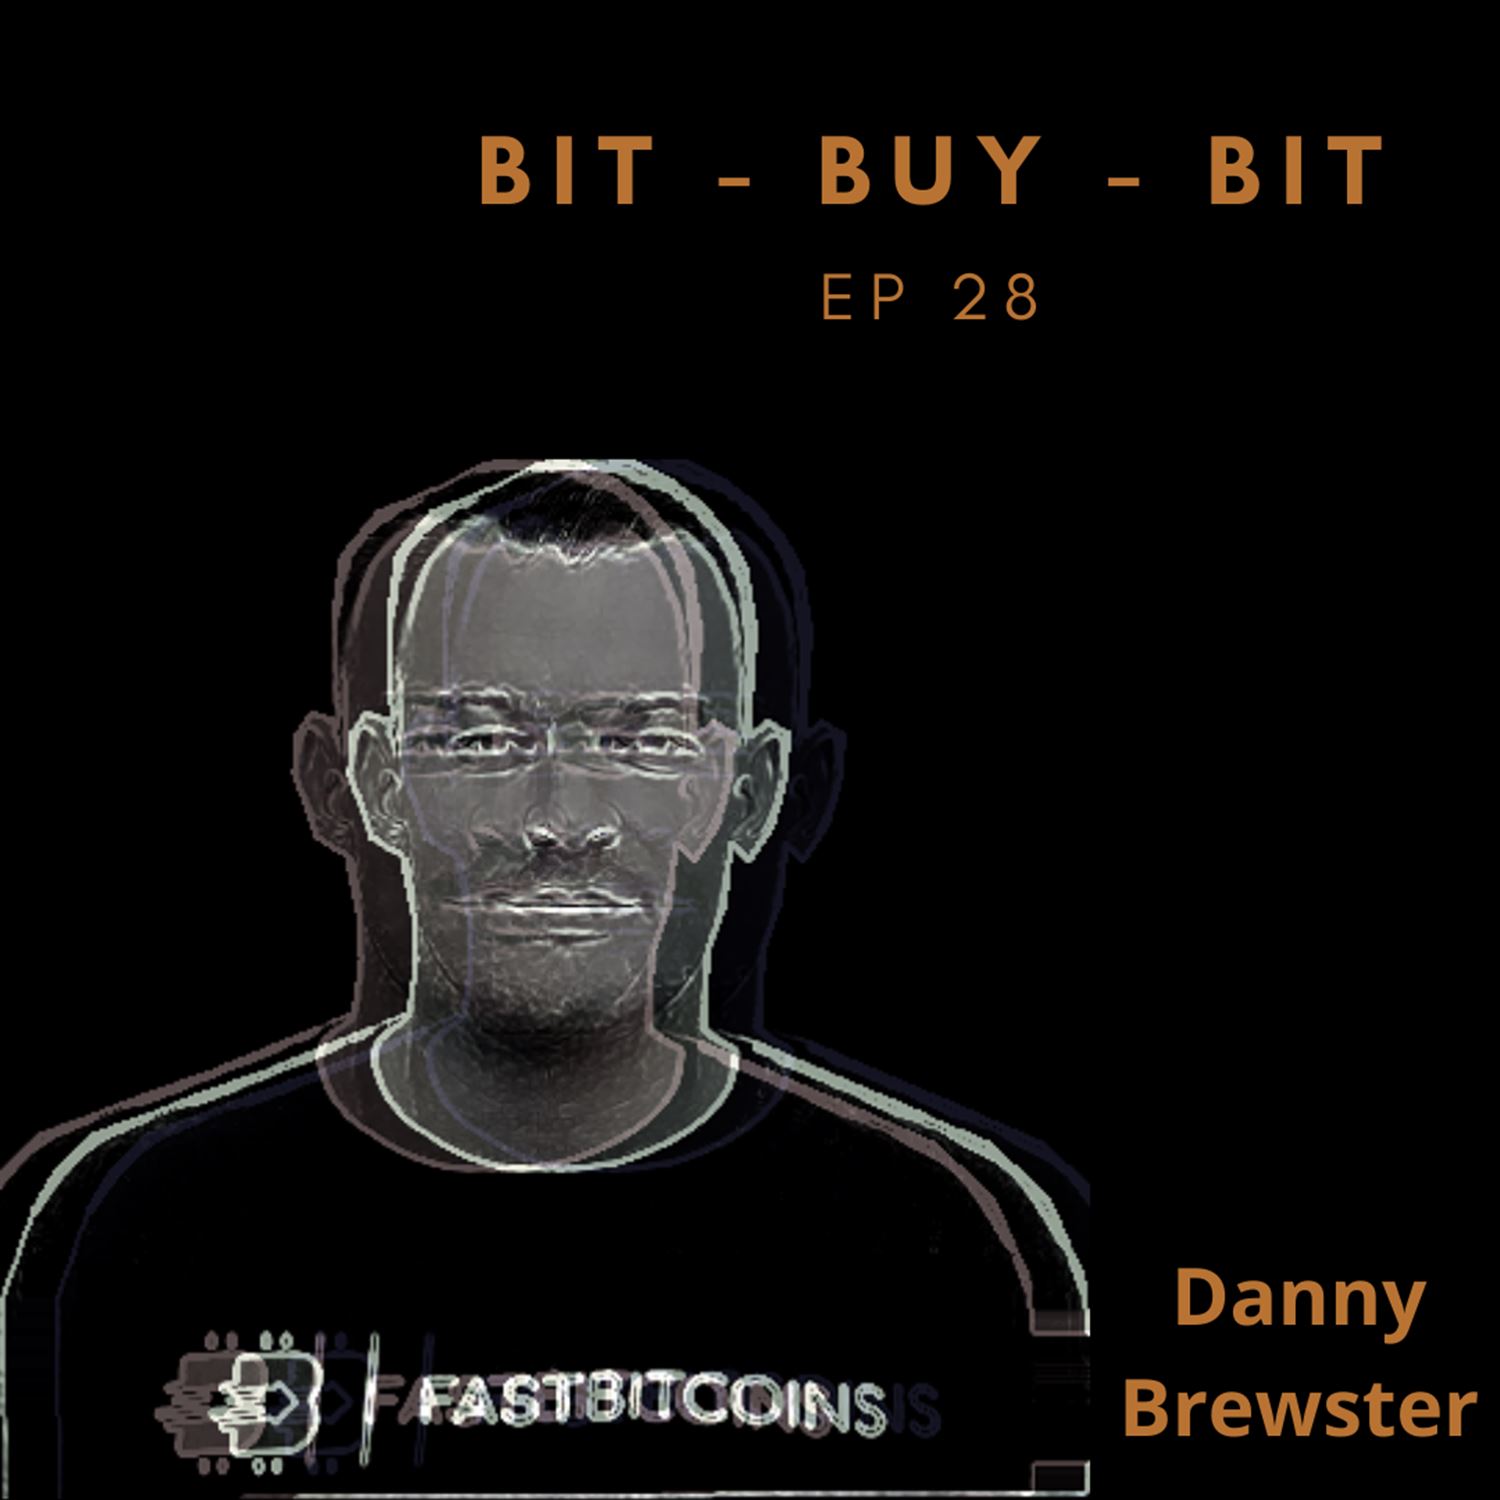 EP28 Bitcoin podcast with Danny Brewster.